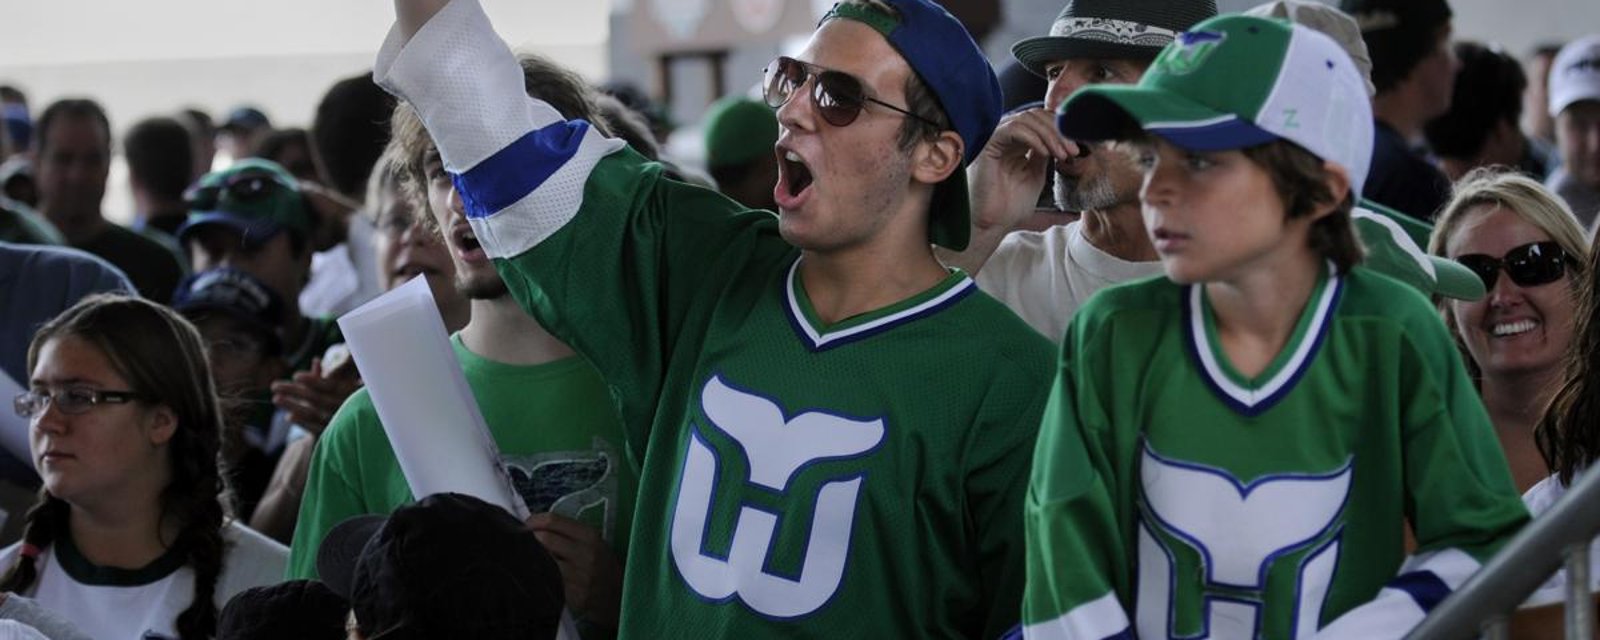 Hurricanes bring back popular goal song “Brass Bonanza” for Whalers night